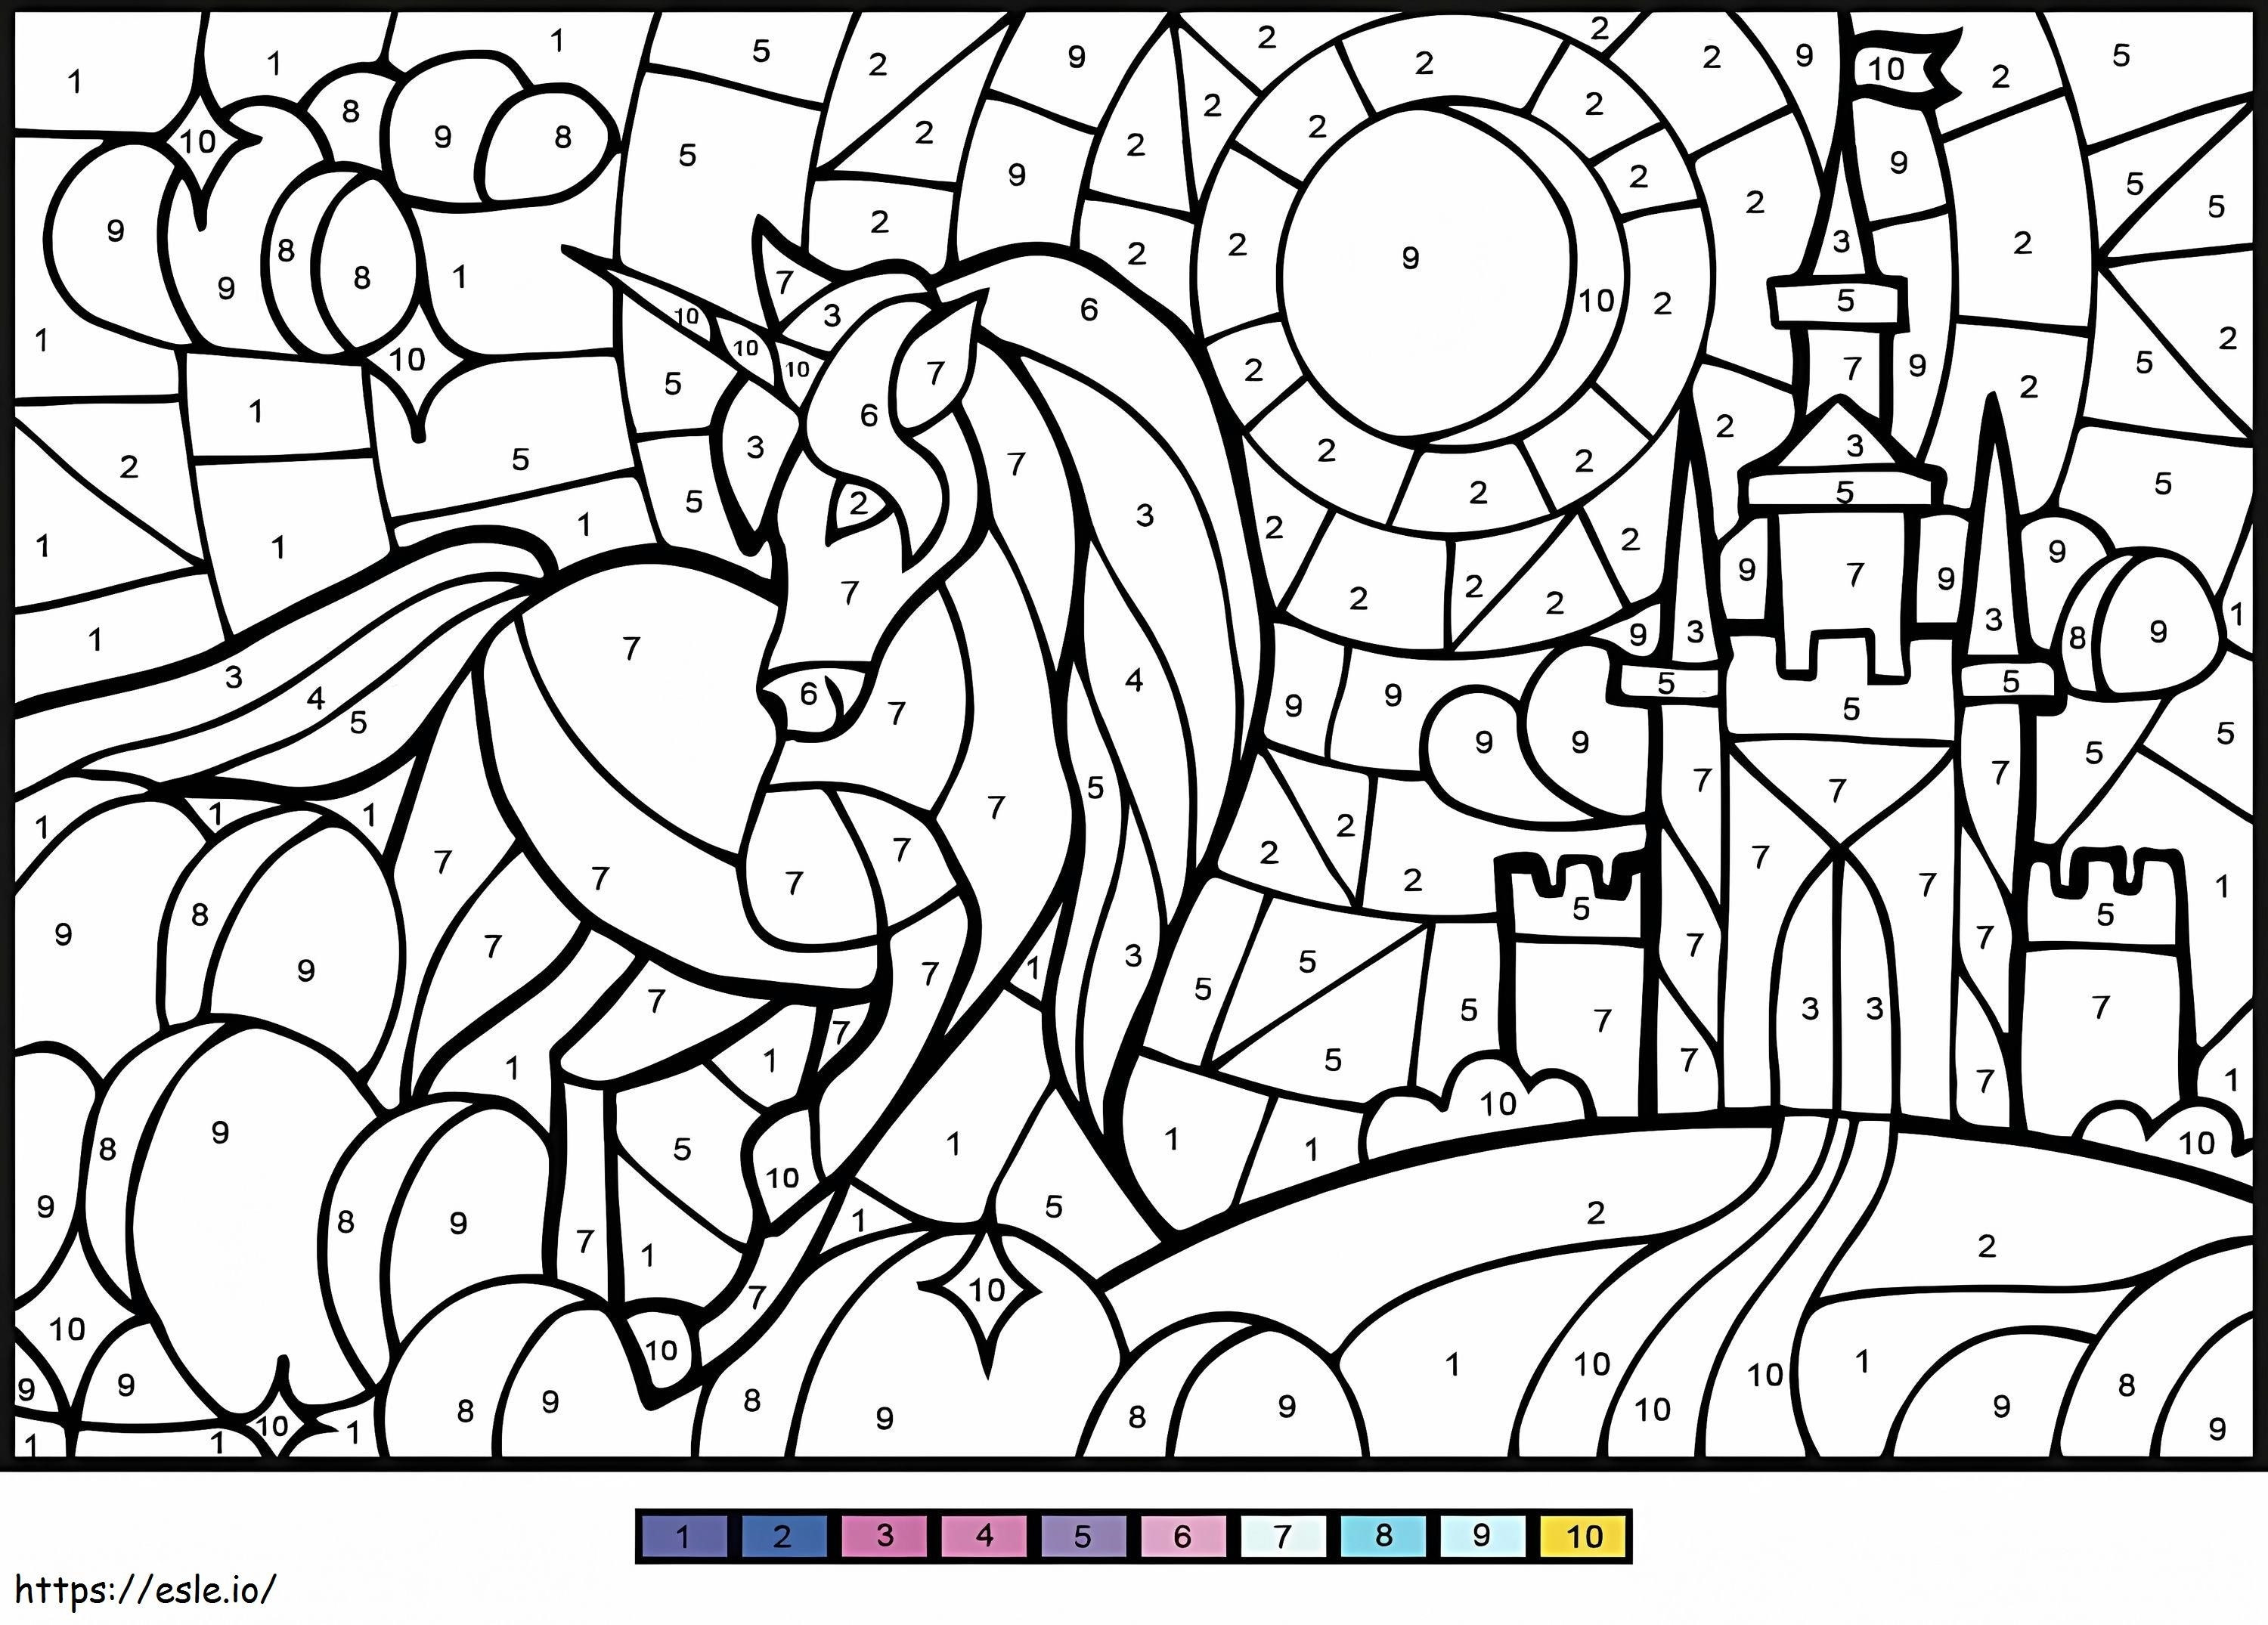 Magical Unicorn 4 coloring page